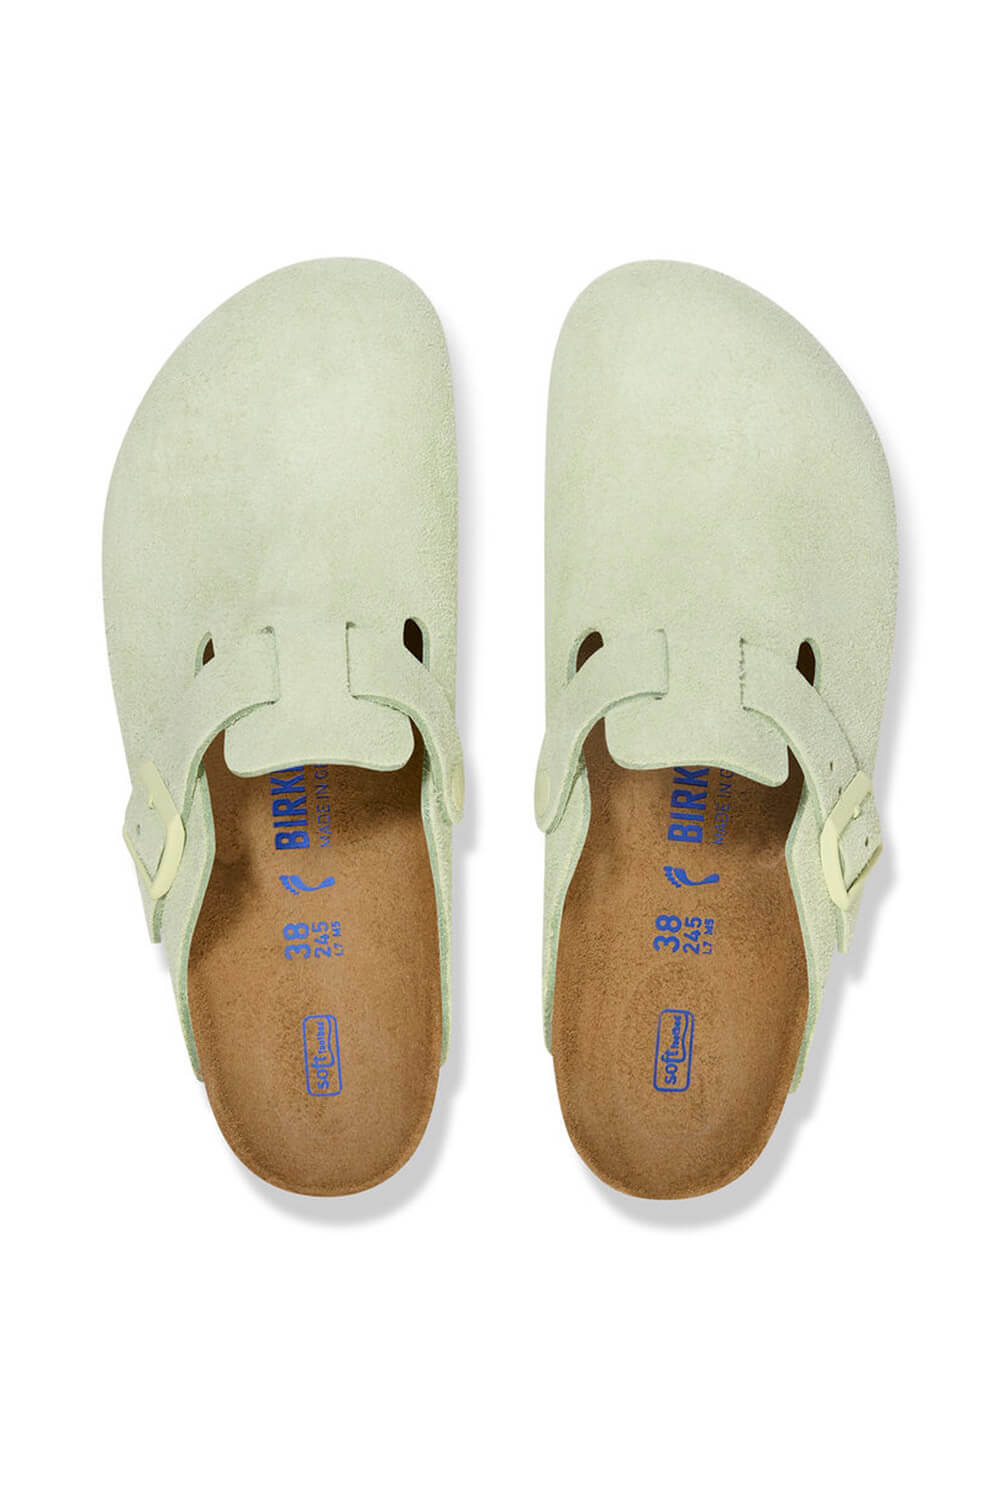 Birkenstock Boston Soft Footbed Clogs for Women in Faded Lime ...